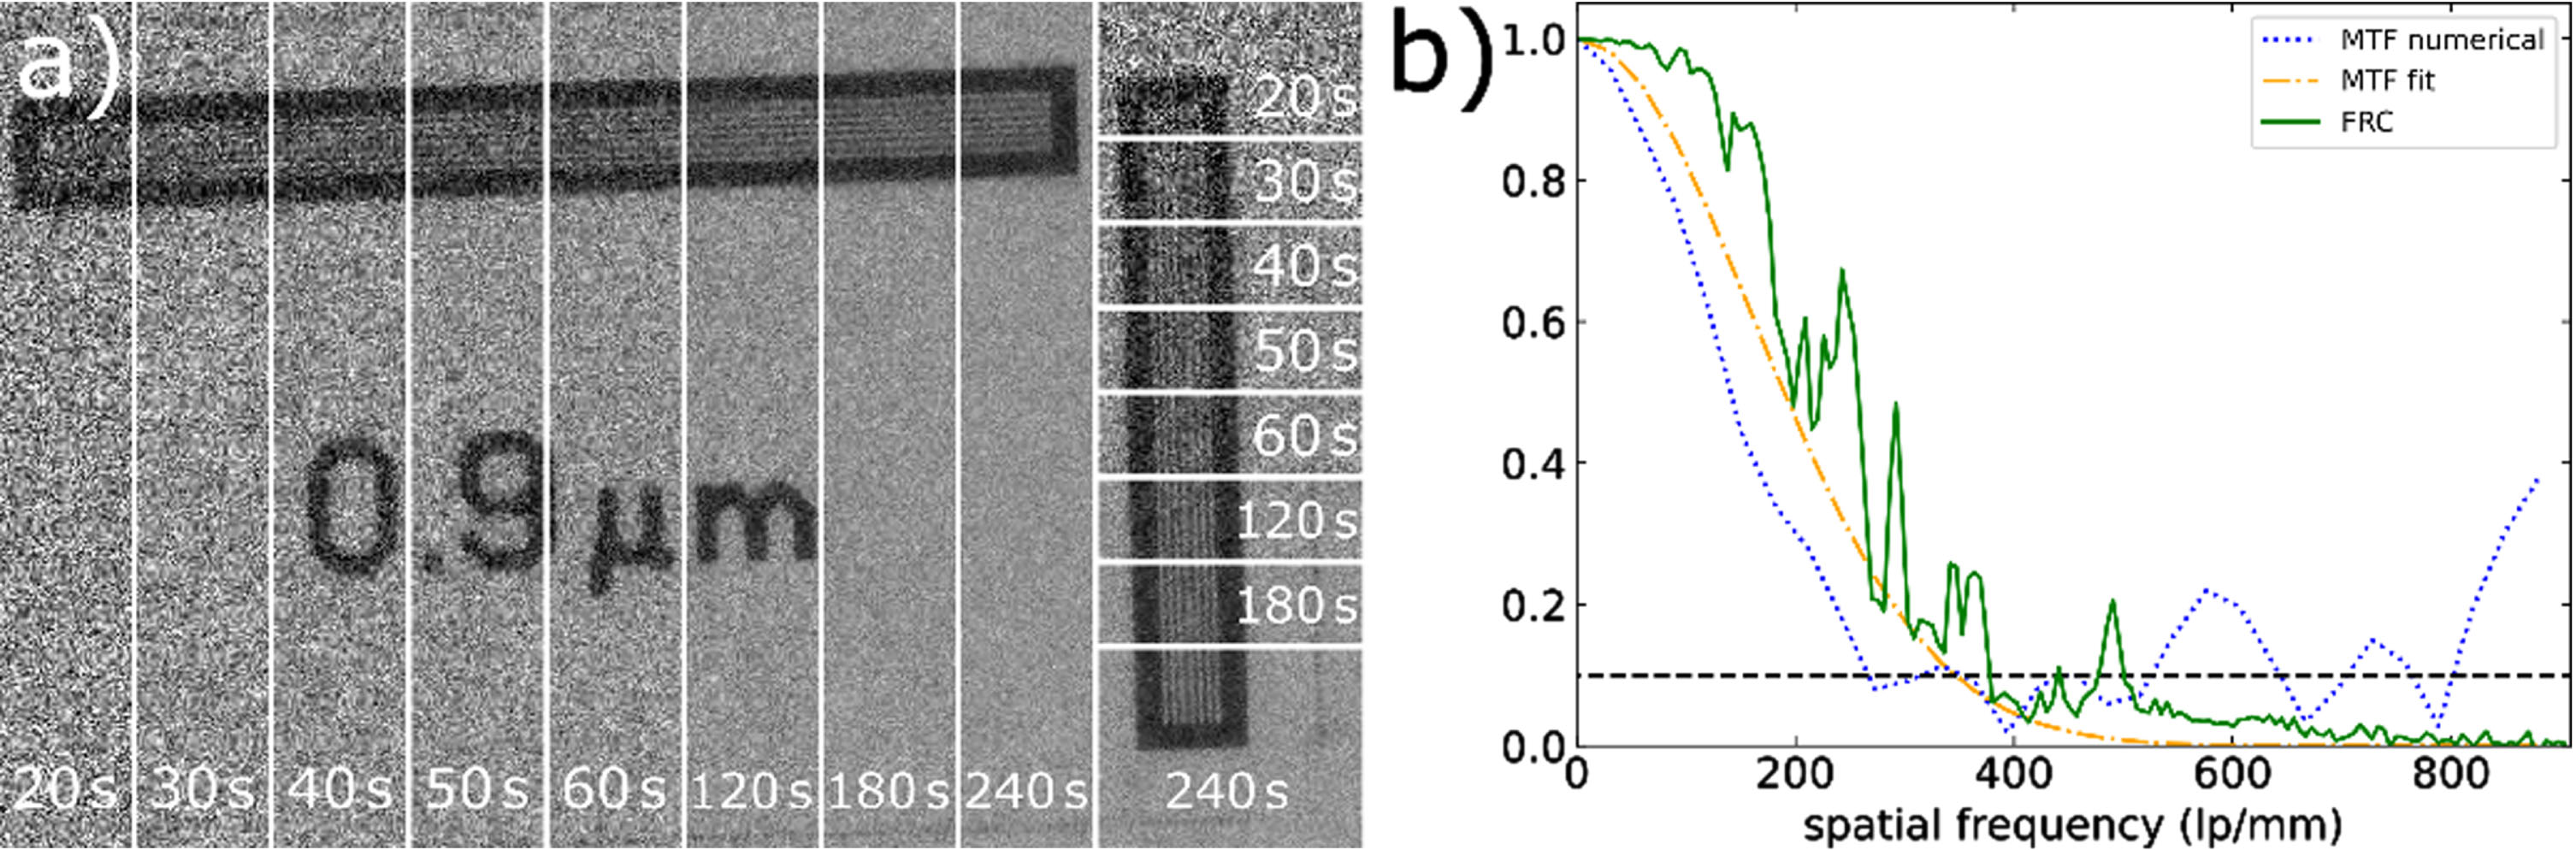 a) 0.9μm bar pattern of the JIMA for different exposure times from 20 s–240 s. With increasing exposure time, the bars become clearly distinguishable. More than 60 s exposure gives only small improvements. b) MTF and FRC extracted from a 240 s image of the JIMA. Both fitted MTF and FRC yield a similar resolution of 350–380 lp/mm at the 10% threshold, while the numerical MTF only results in around 270 lp/mm due to the noise.